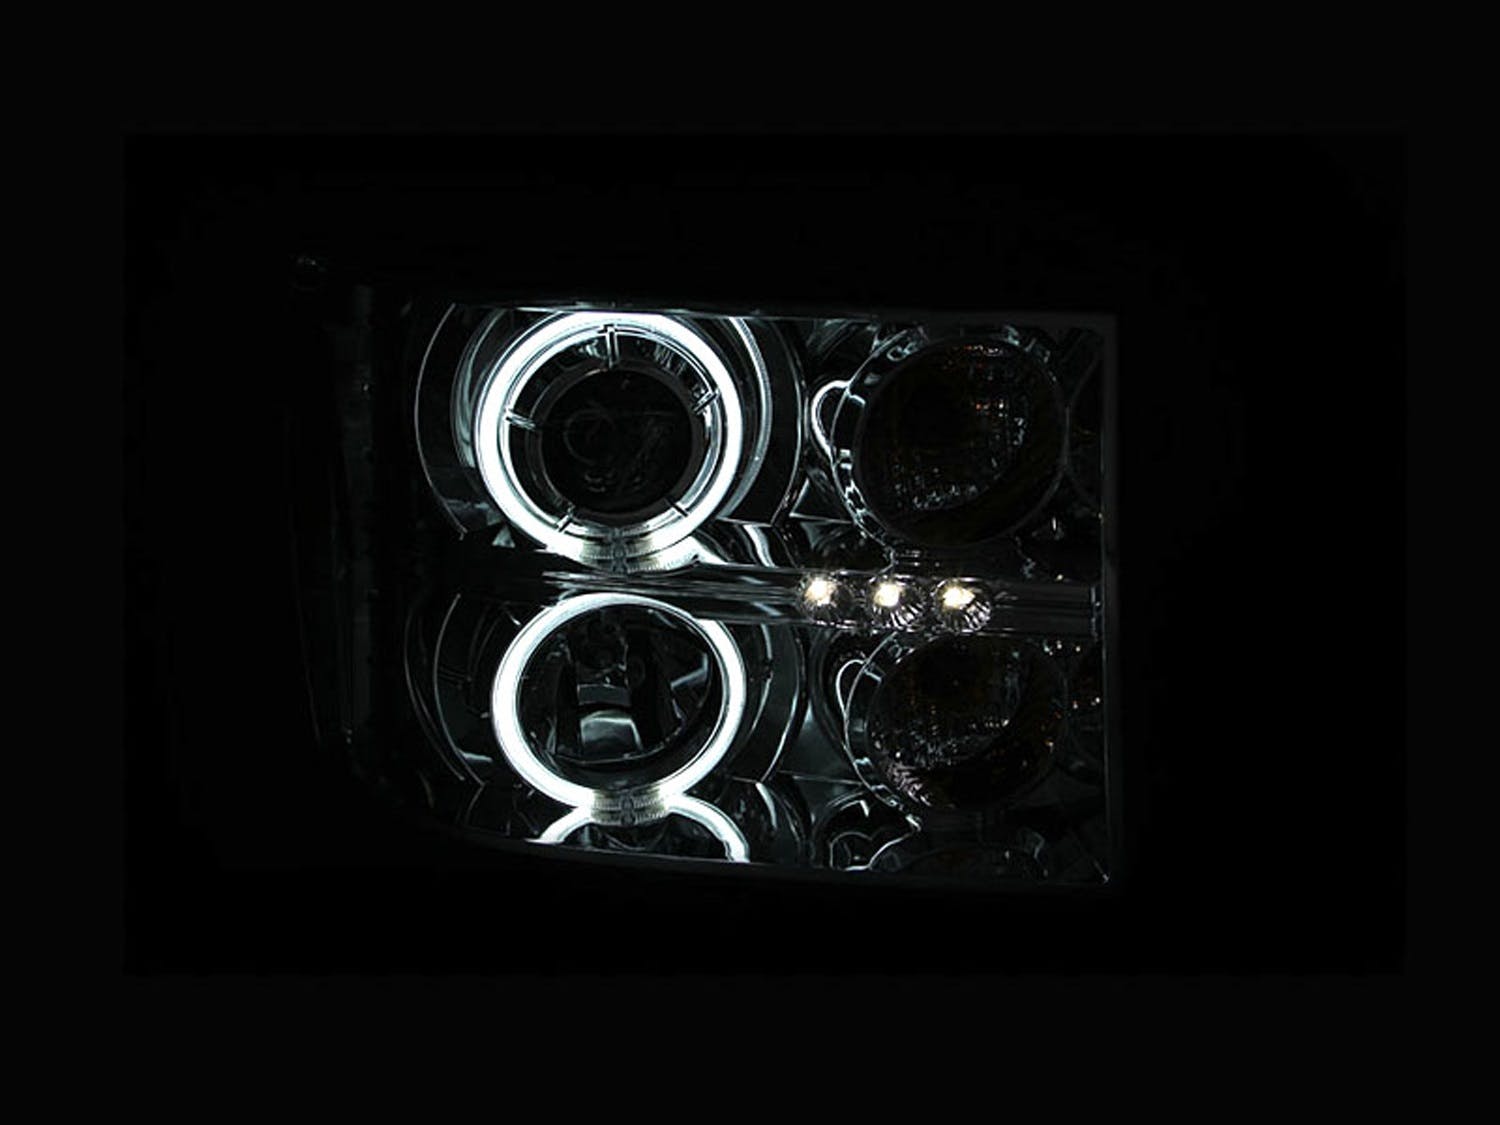 AnzoUSA 111126 Projector Headlights with Halo Chrome